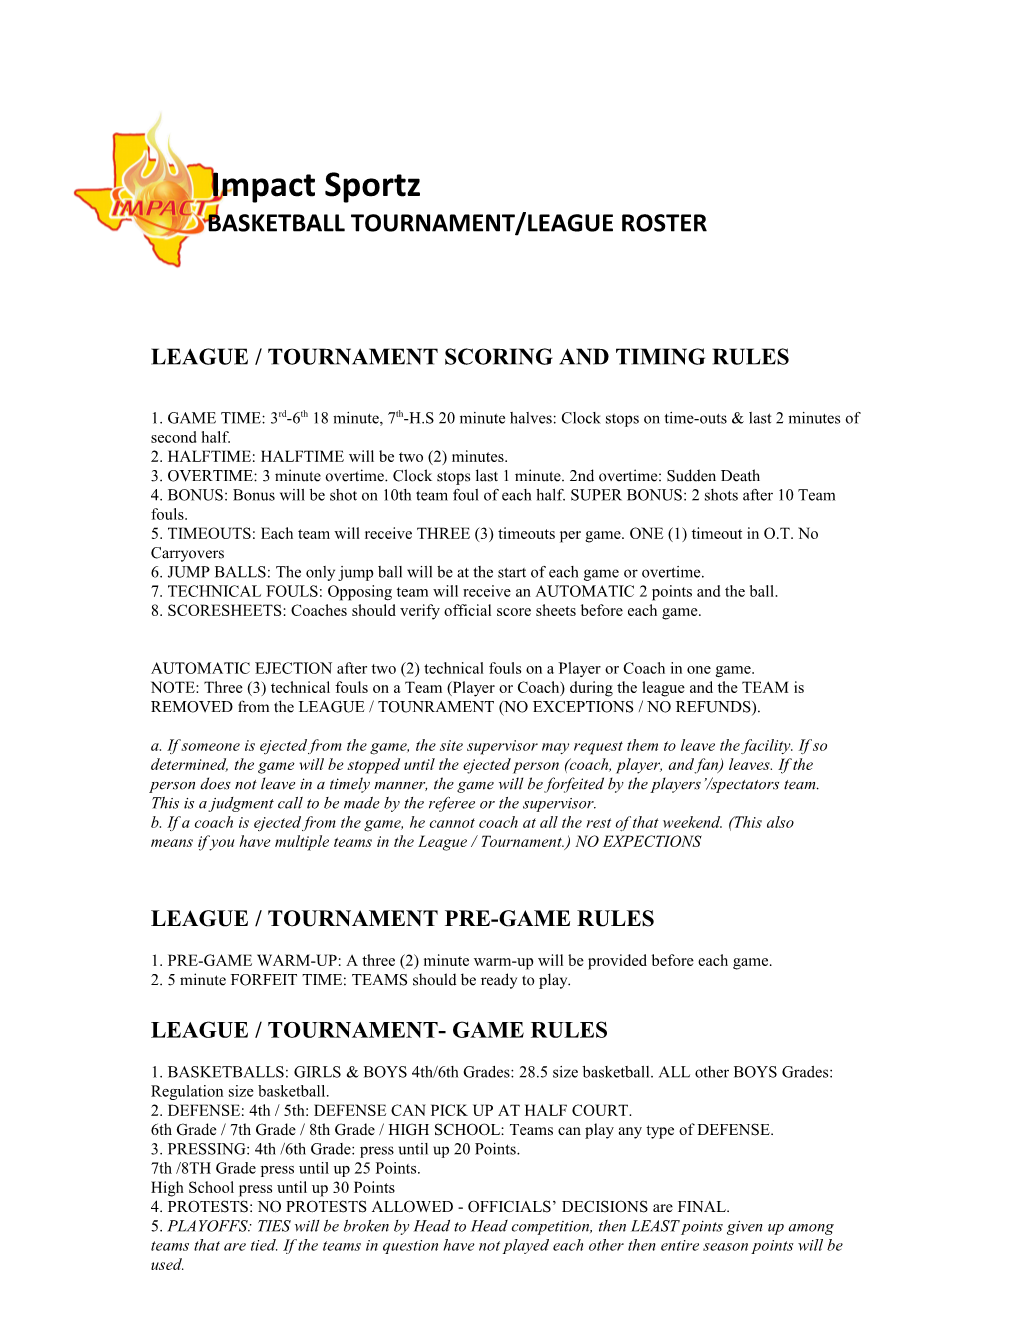 League / Tournament Scoring and Timing Rules